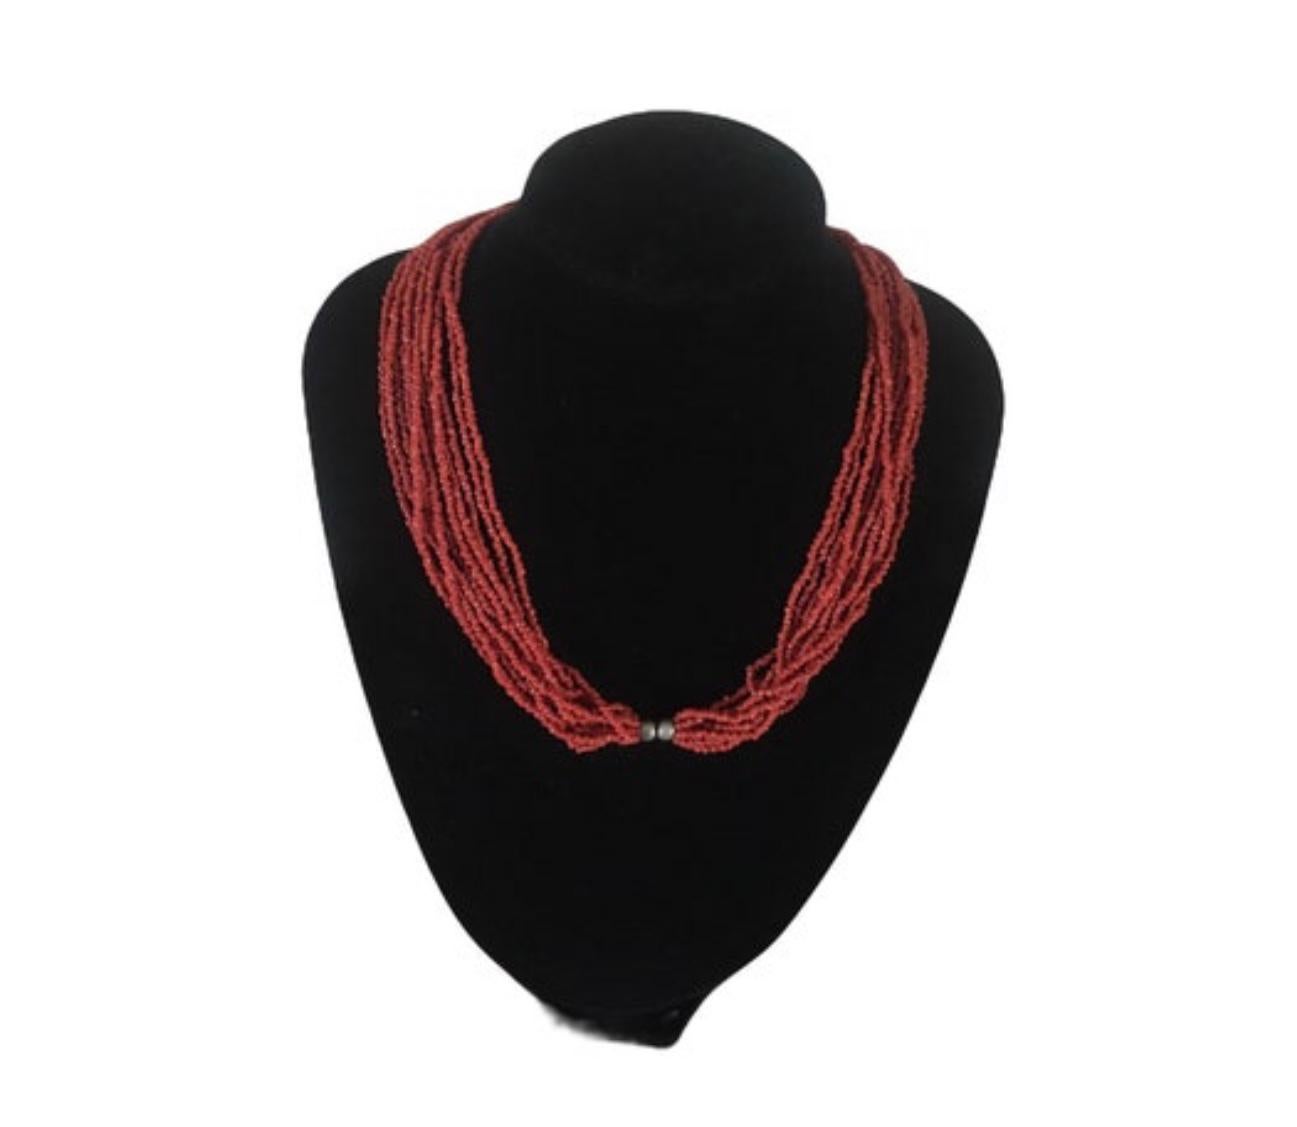 Vintage red natural coral multi strand bead necklace 
Art Deco style
In very good condition 
Tribal necklace 
Approx 60 cm long
12 stands
White metal beads and clasp (not silver )